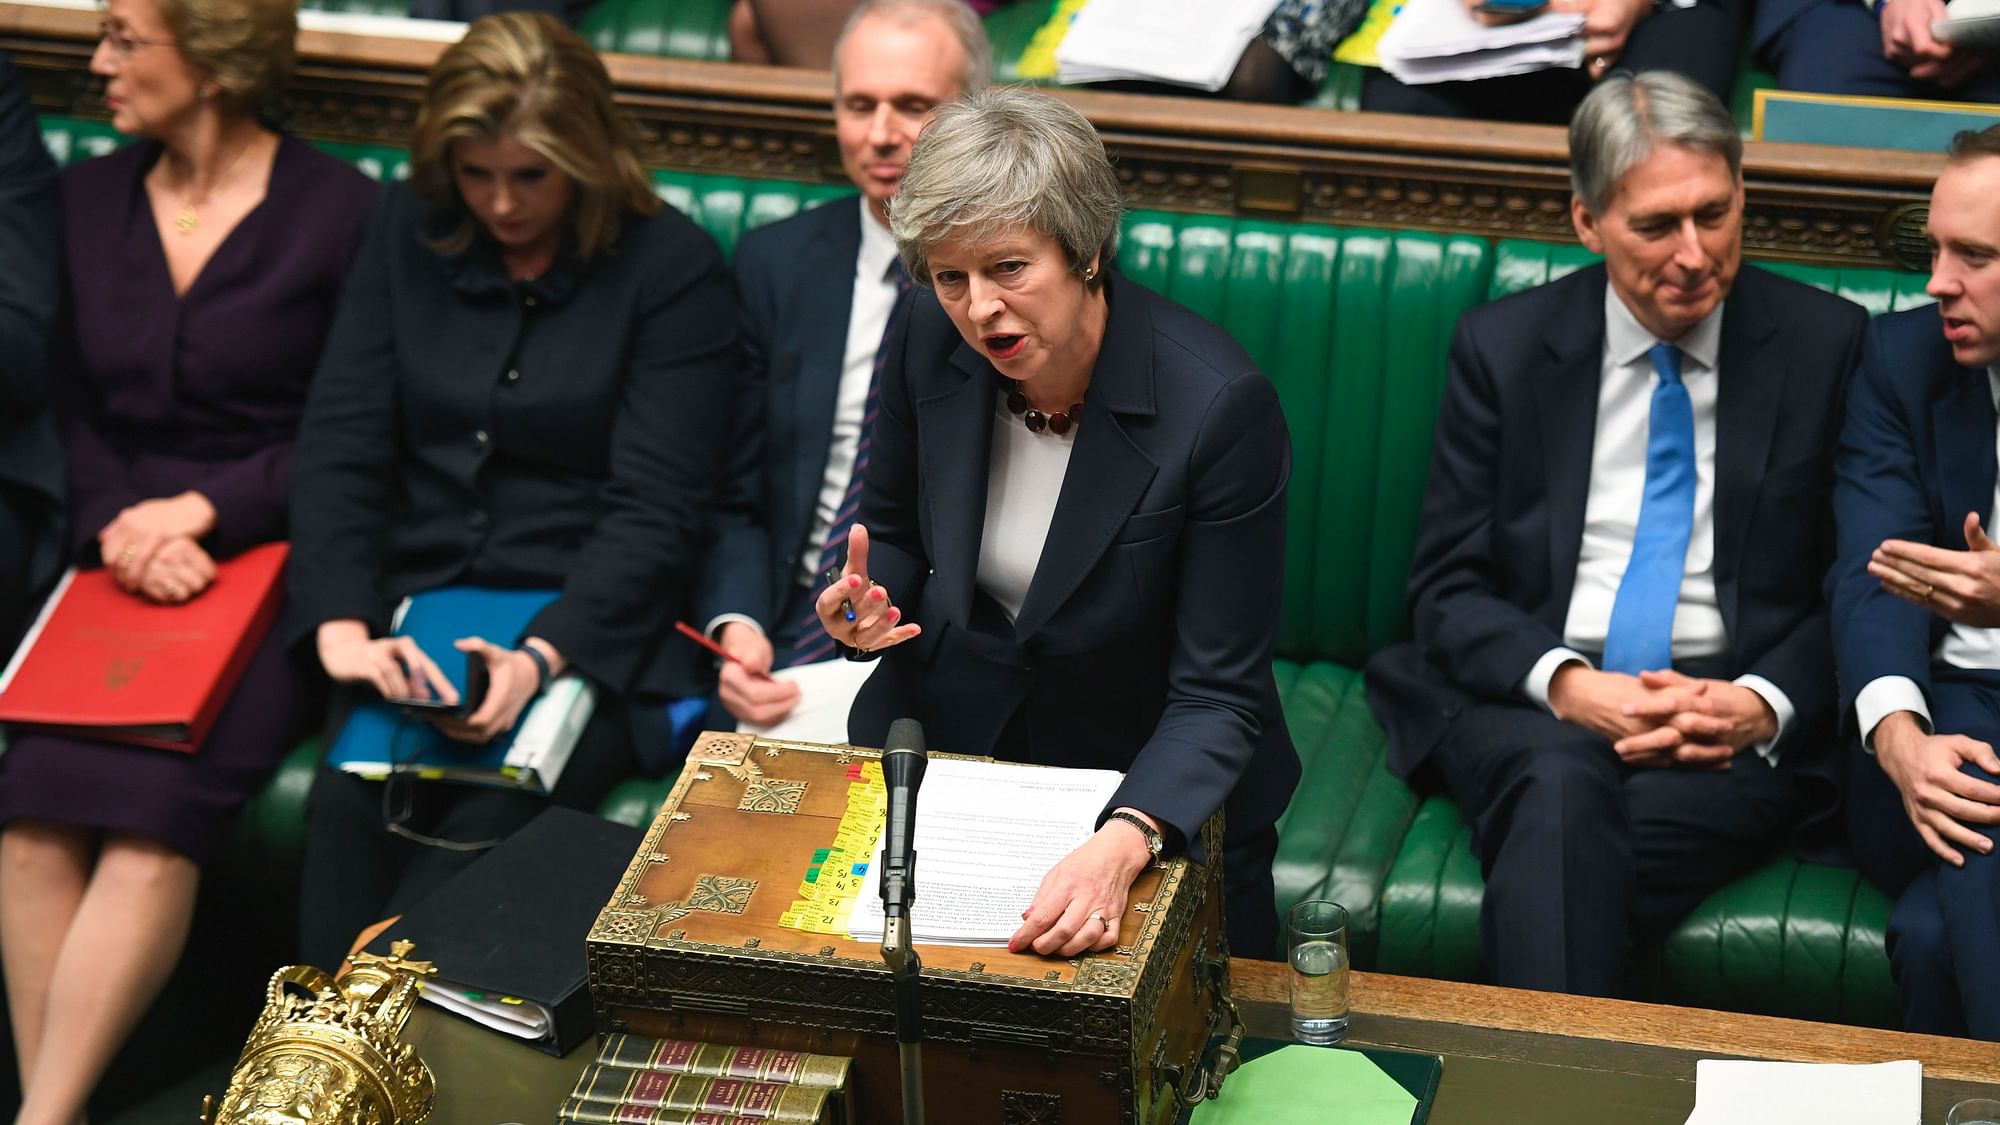 Britain’s Prime Minister Theresa May, centre, speaks, during Prime Minister’s Questions in the House of Commons, London.